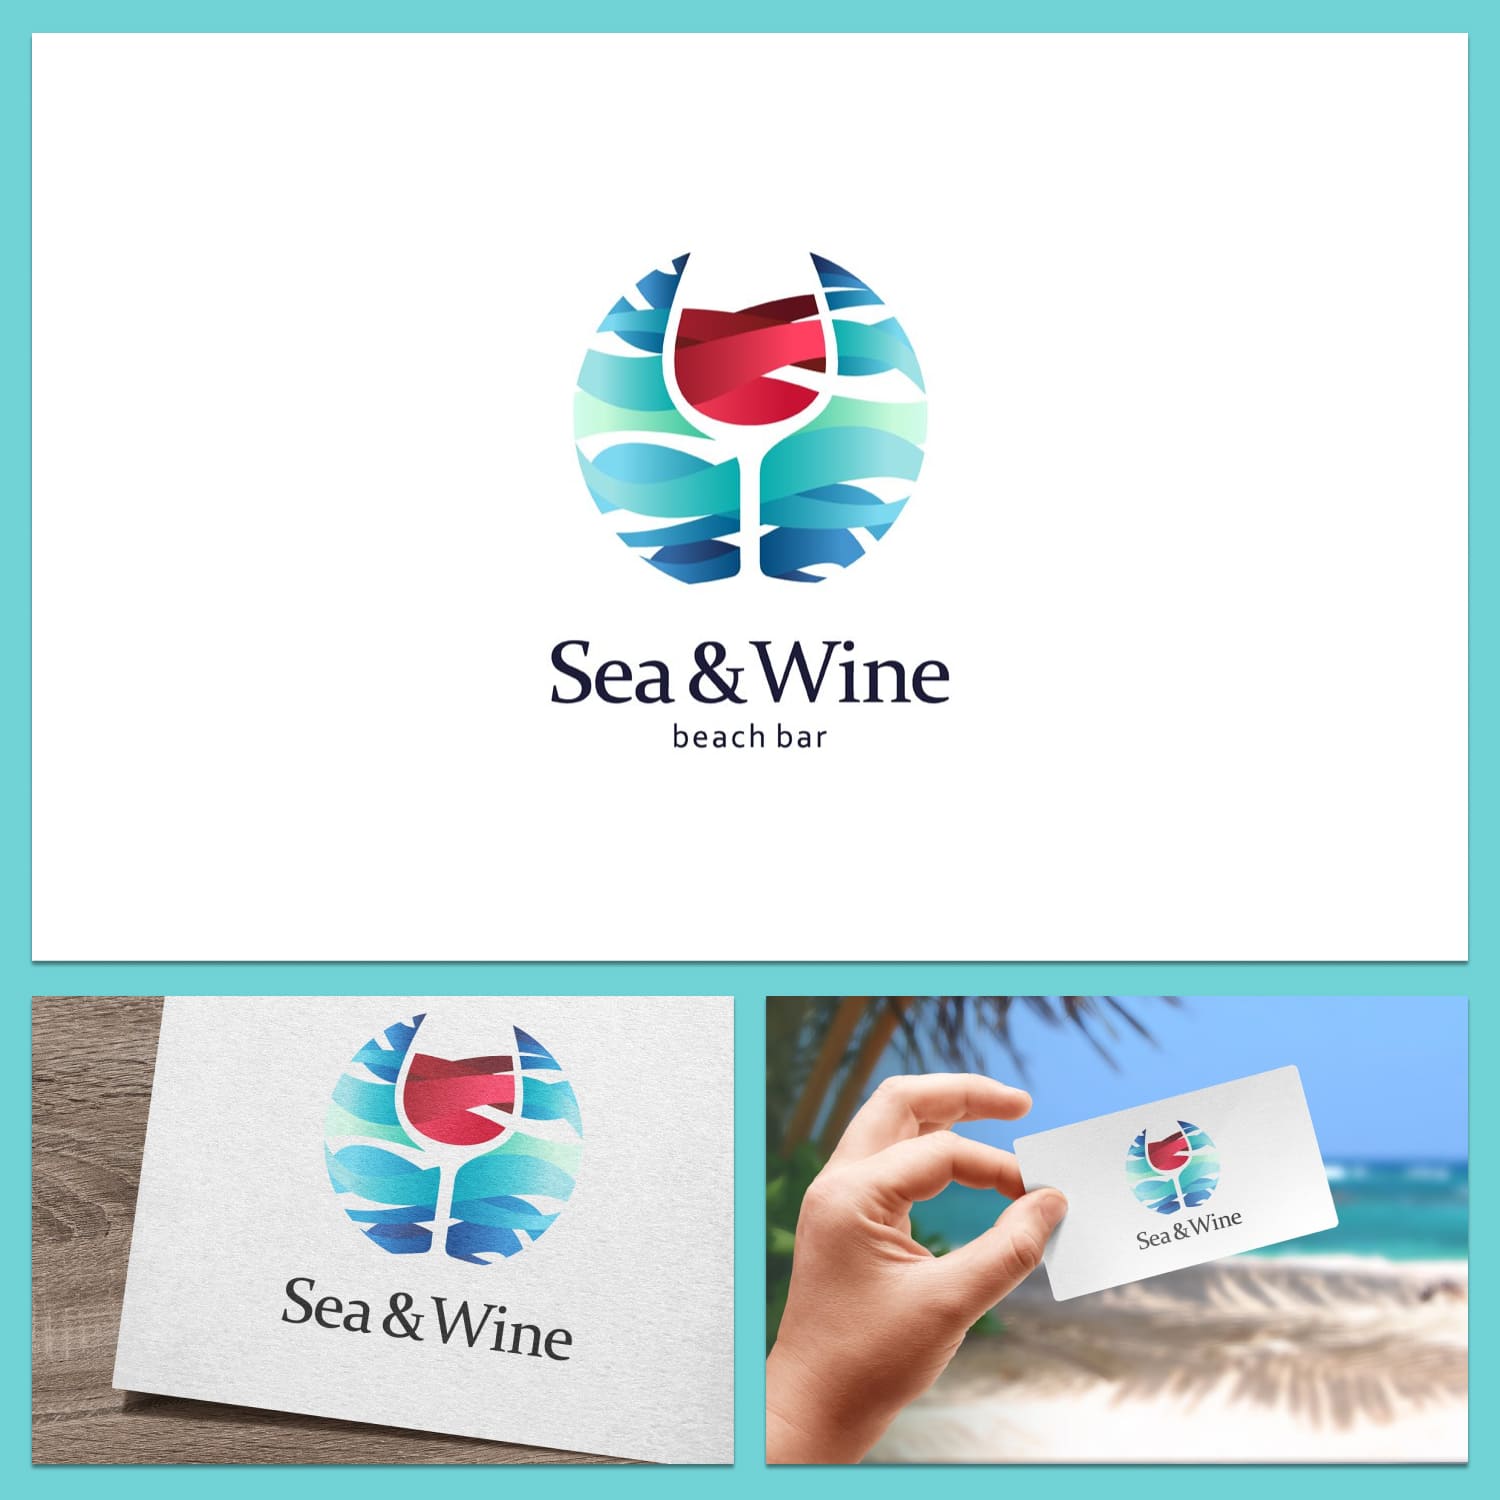 The design recommends that the logo for restaurants, bars, wine menu.